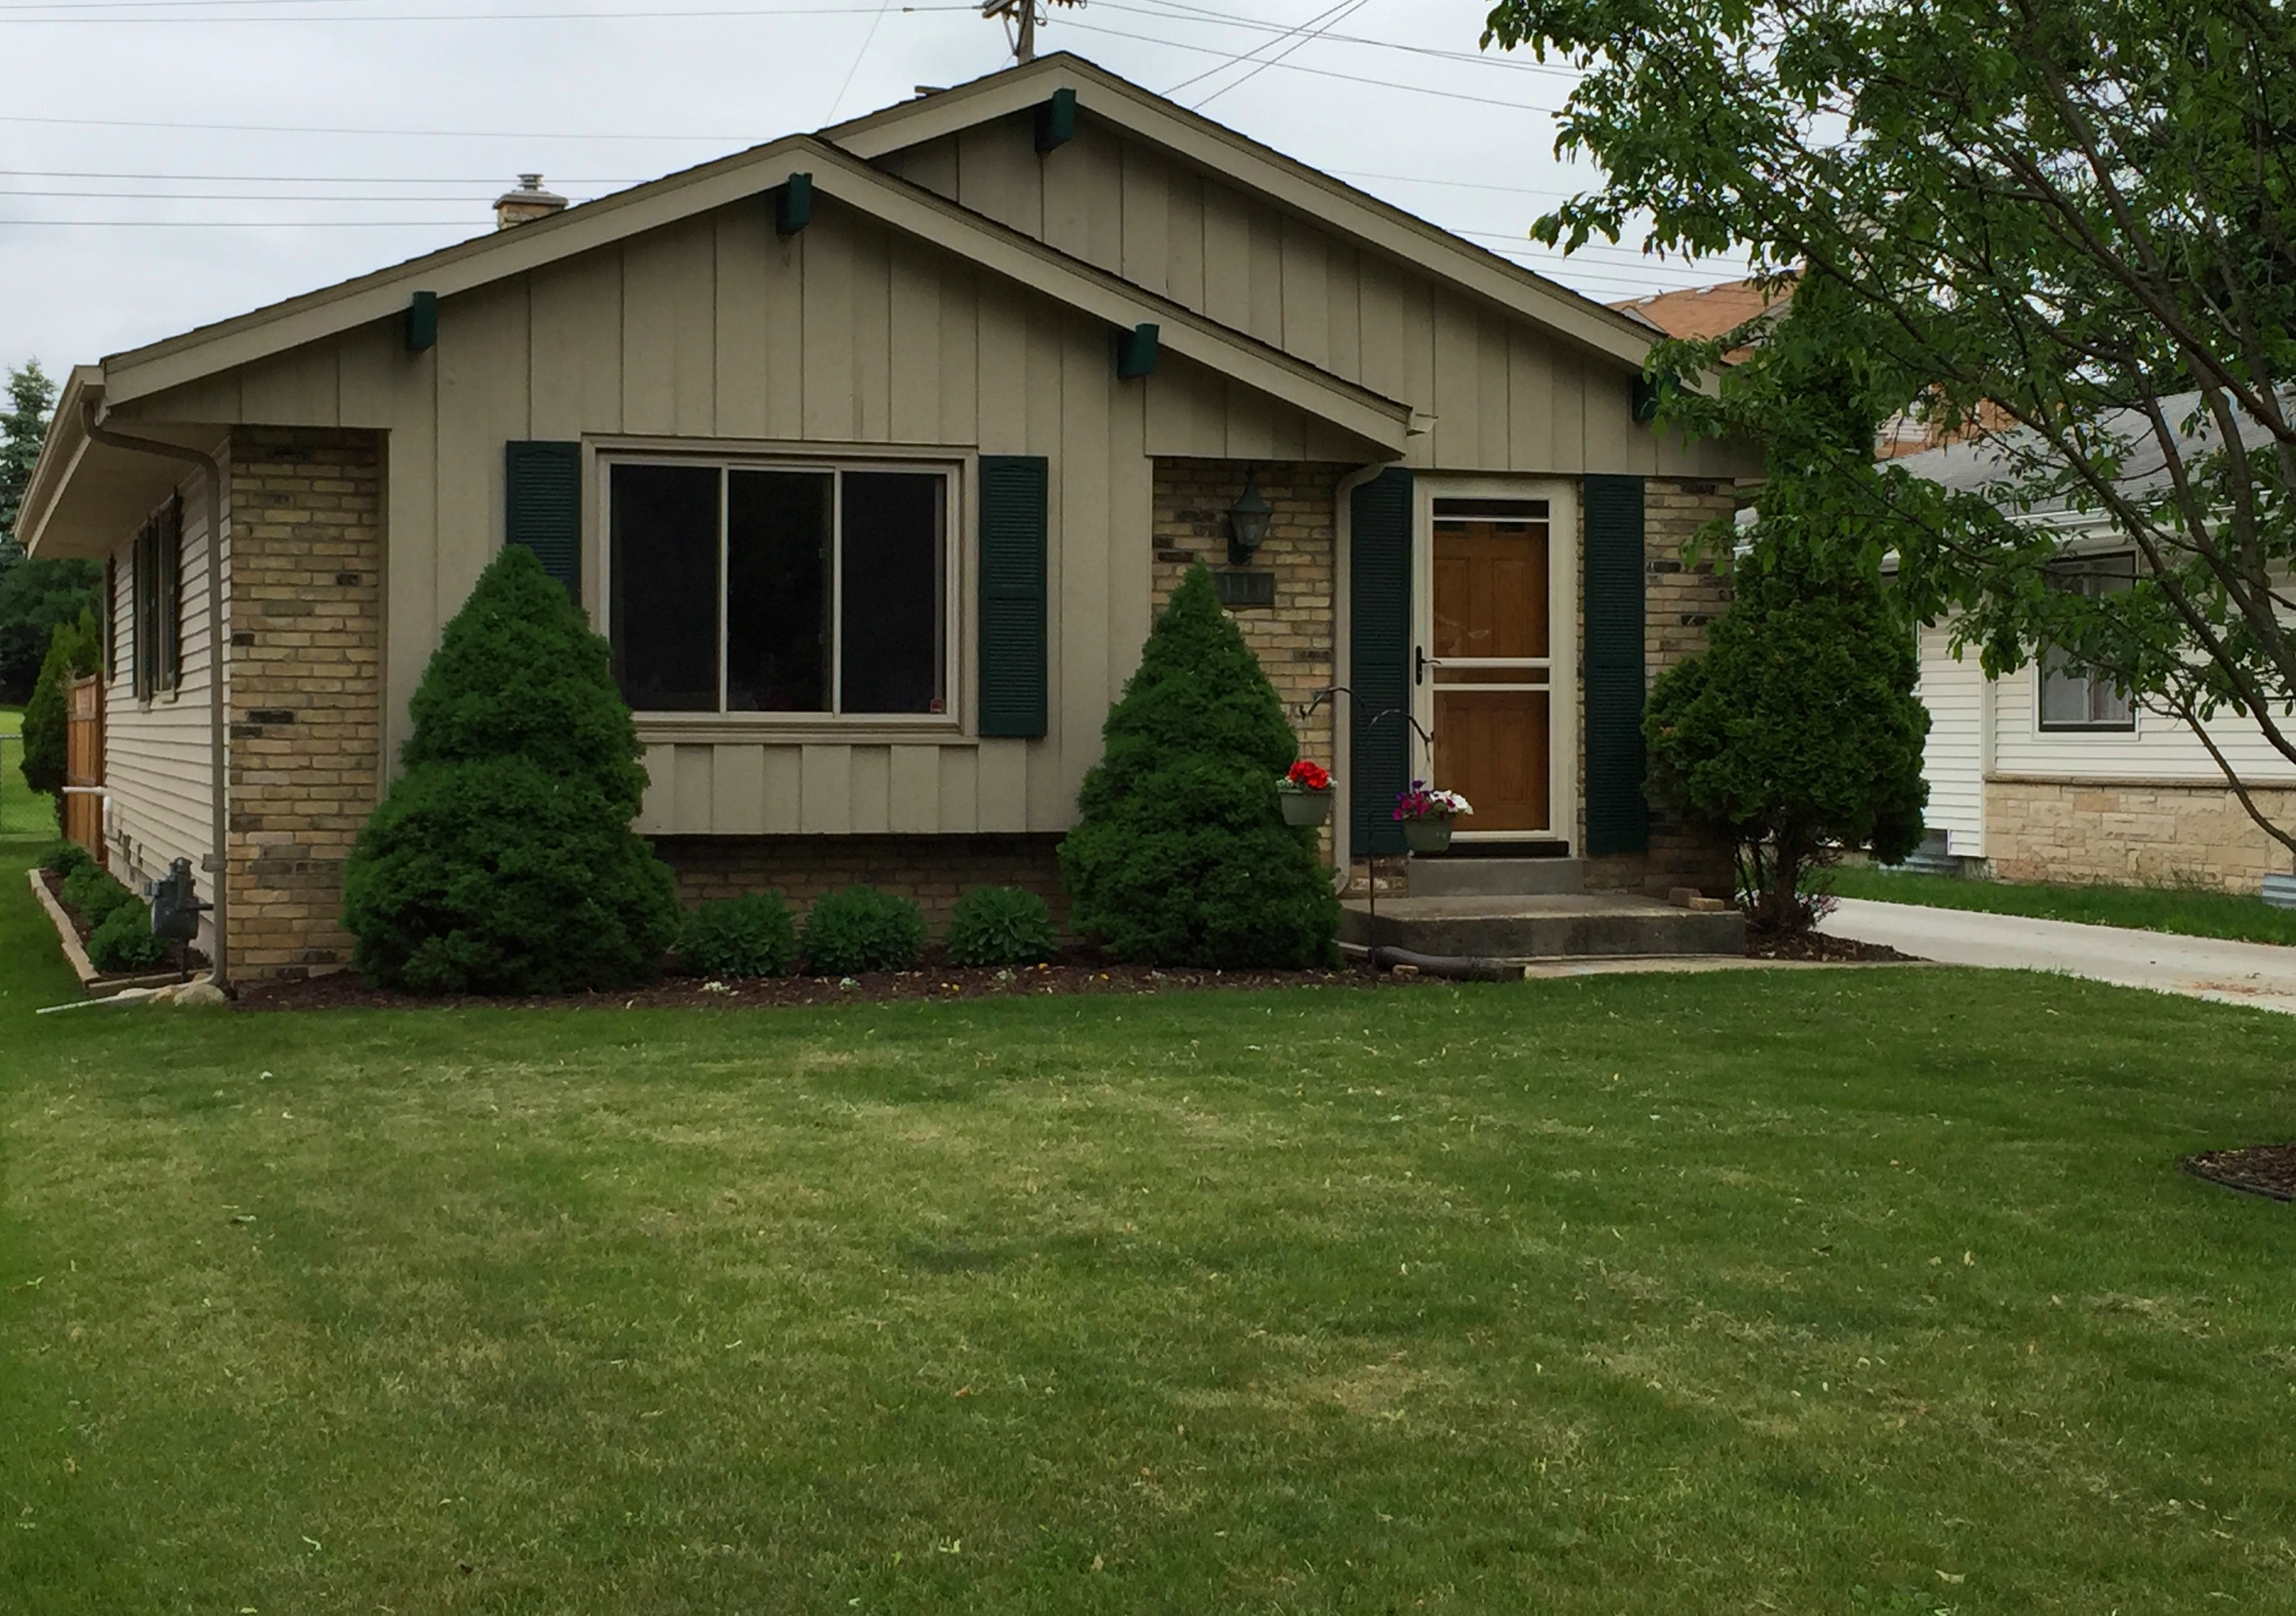 3 Bedroom, 1.5 Bath Wauwatosa Ranch with Many Upgrades for only $199,900!!!